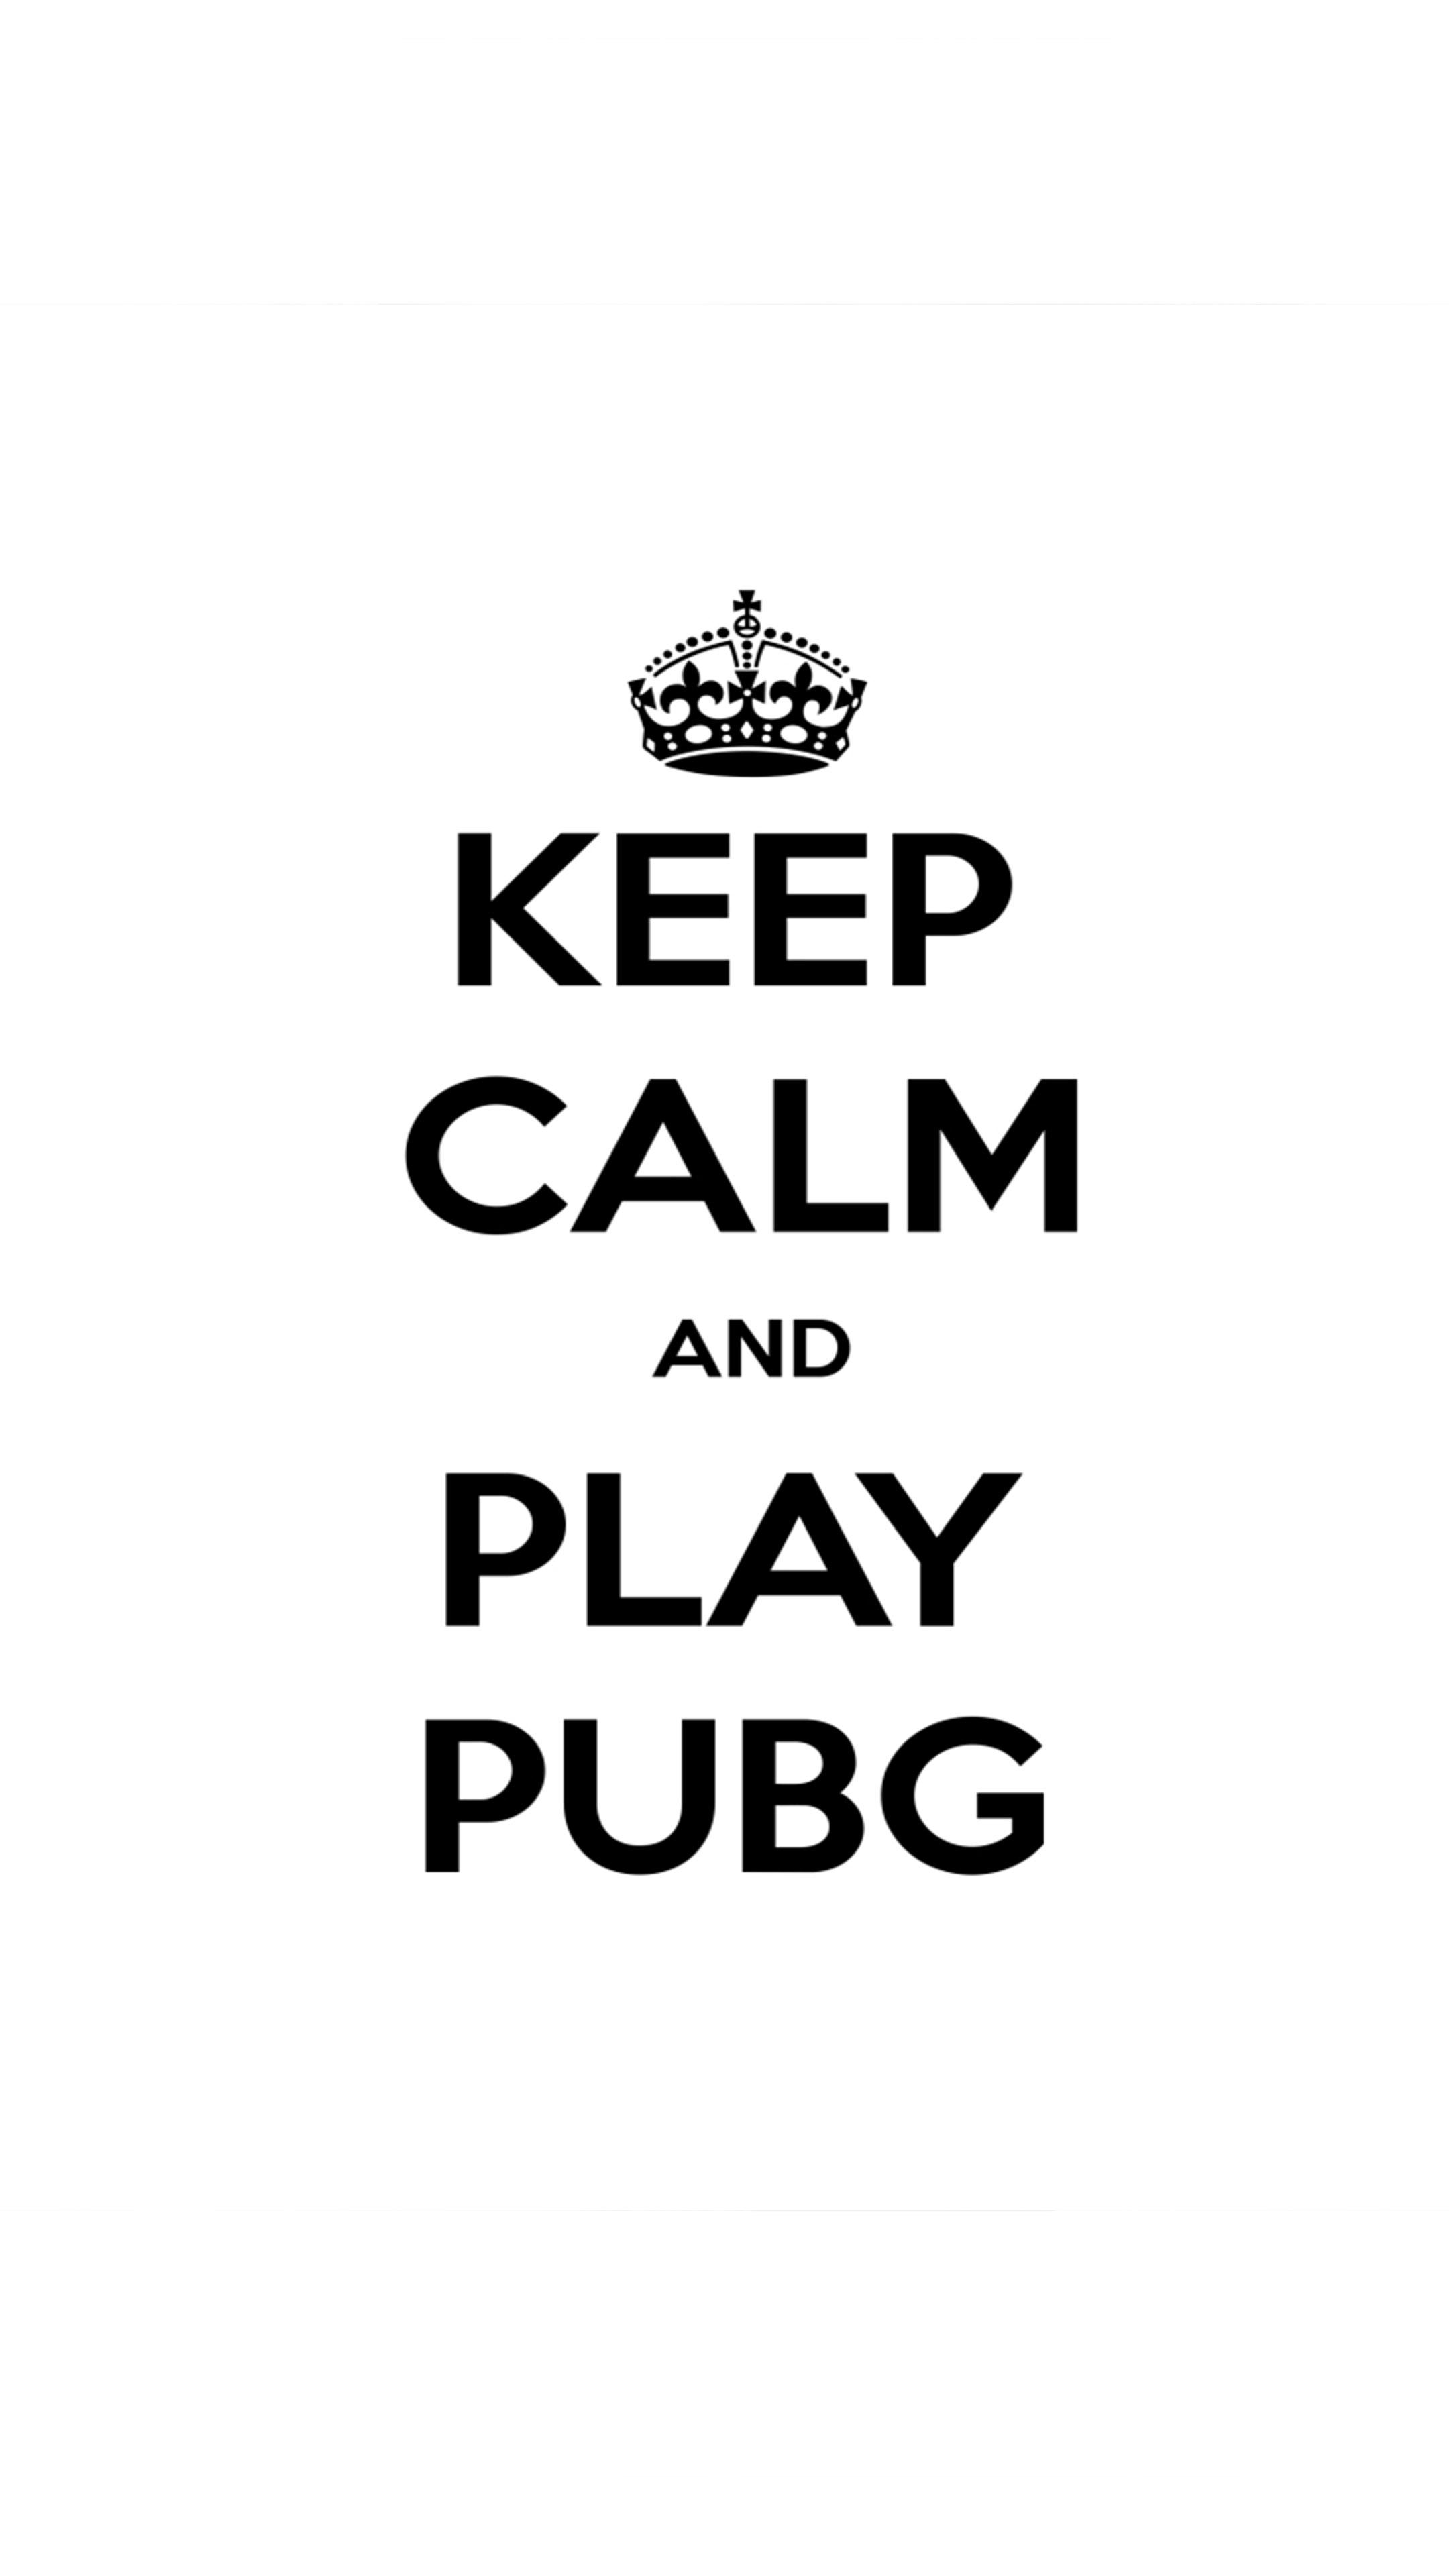 Download Keep Calm And Play PUBG Free Pure 4K Ultra HD Mobile Wallpaper